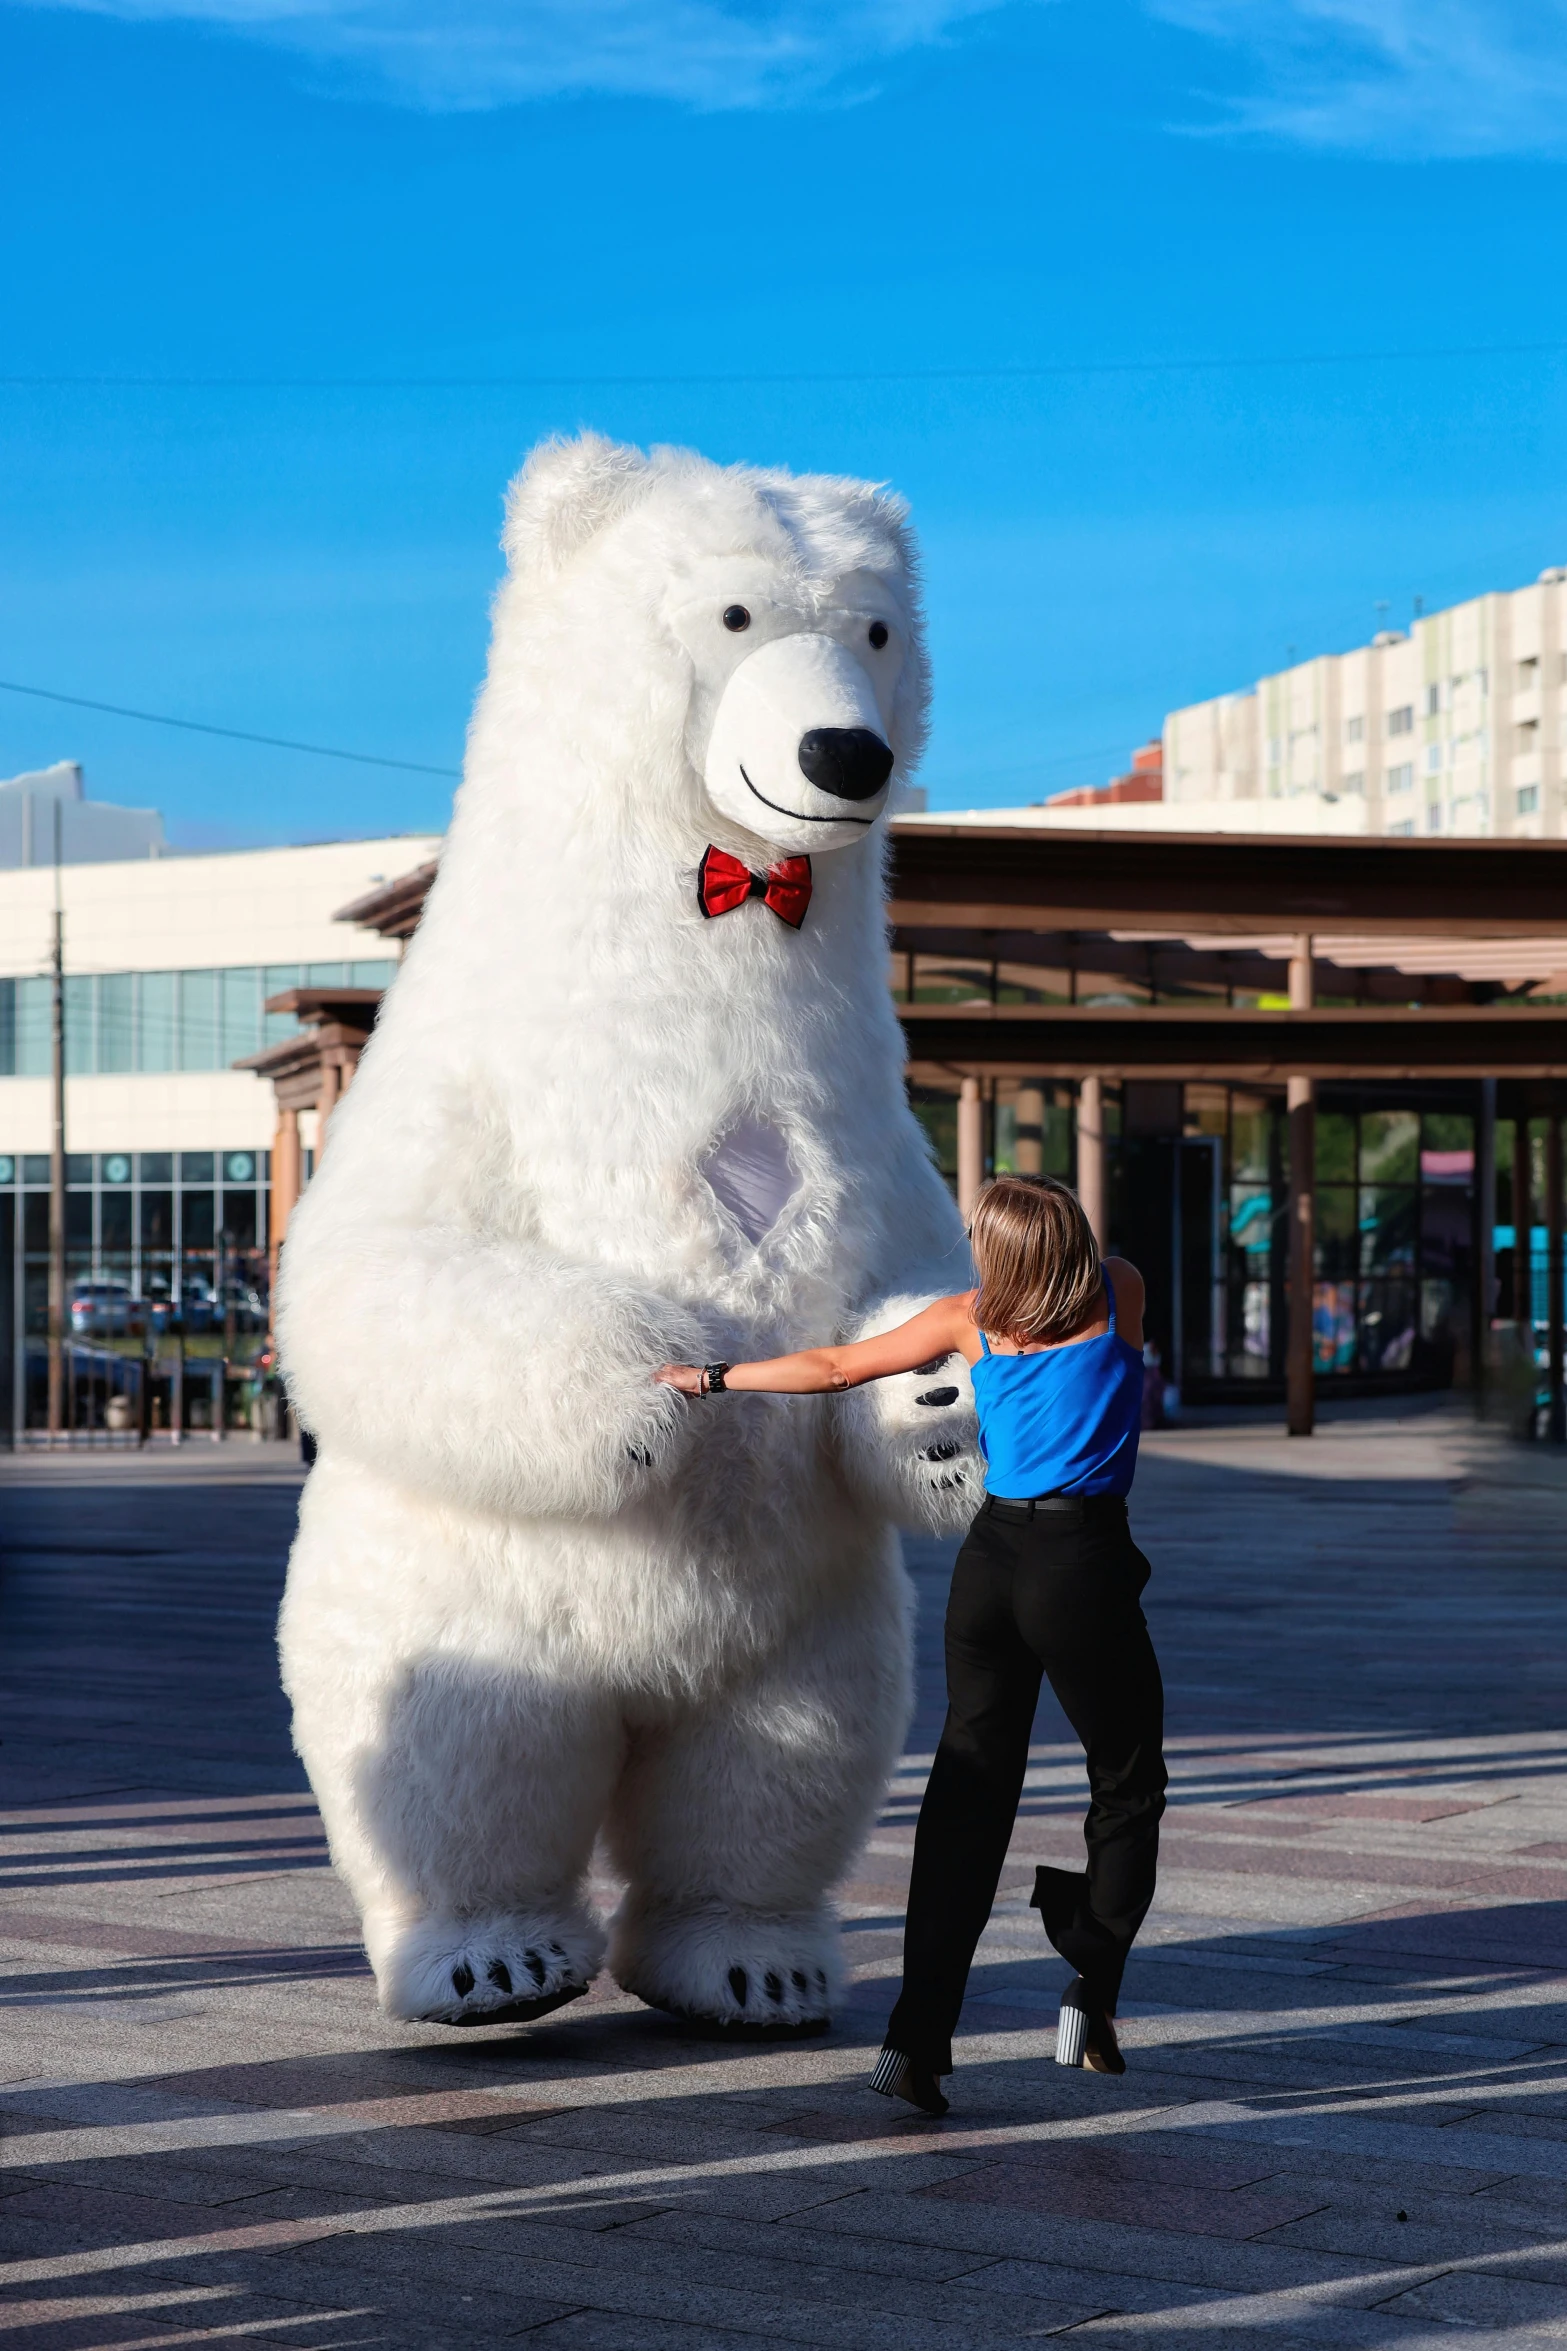 there is a person in a giant white bear costume